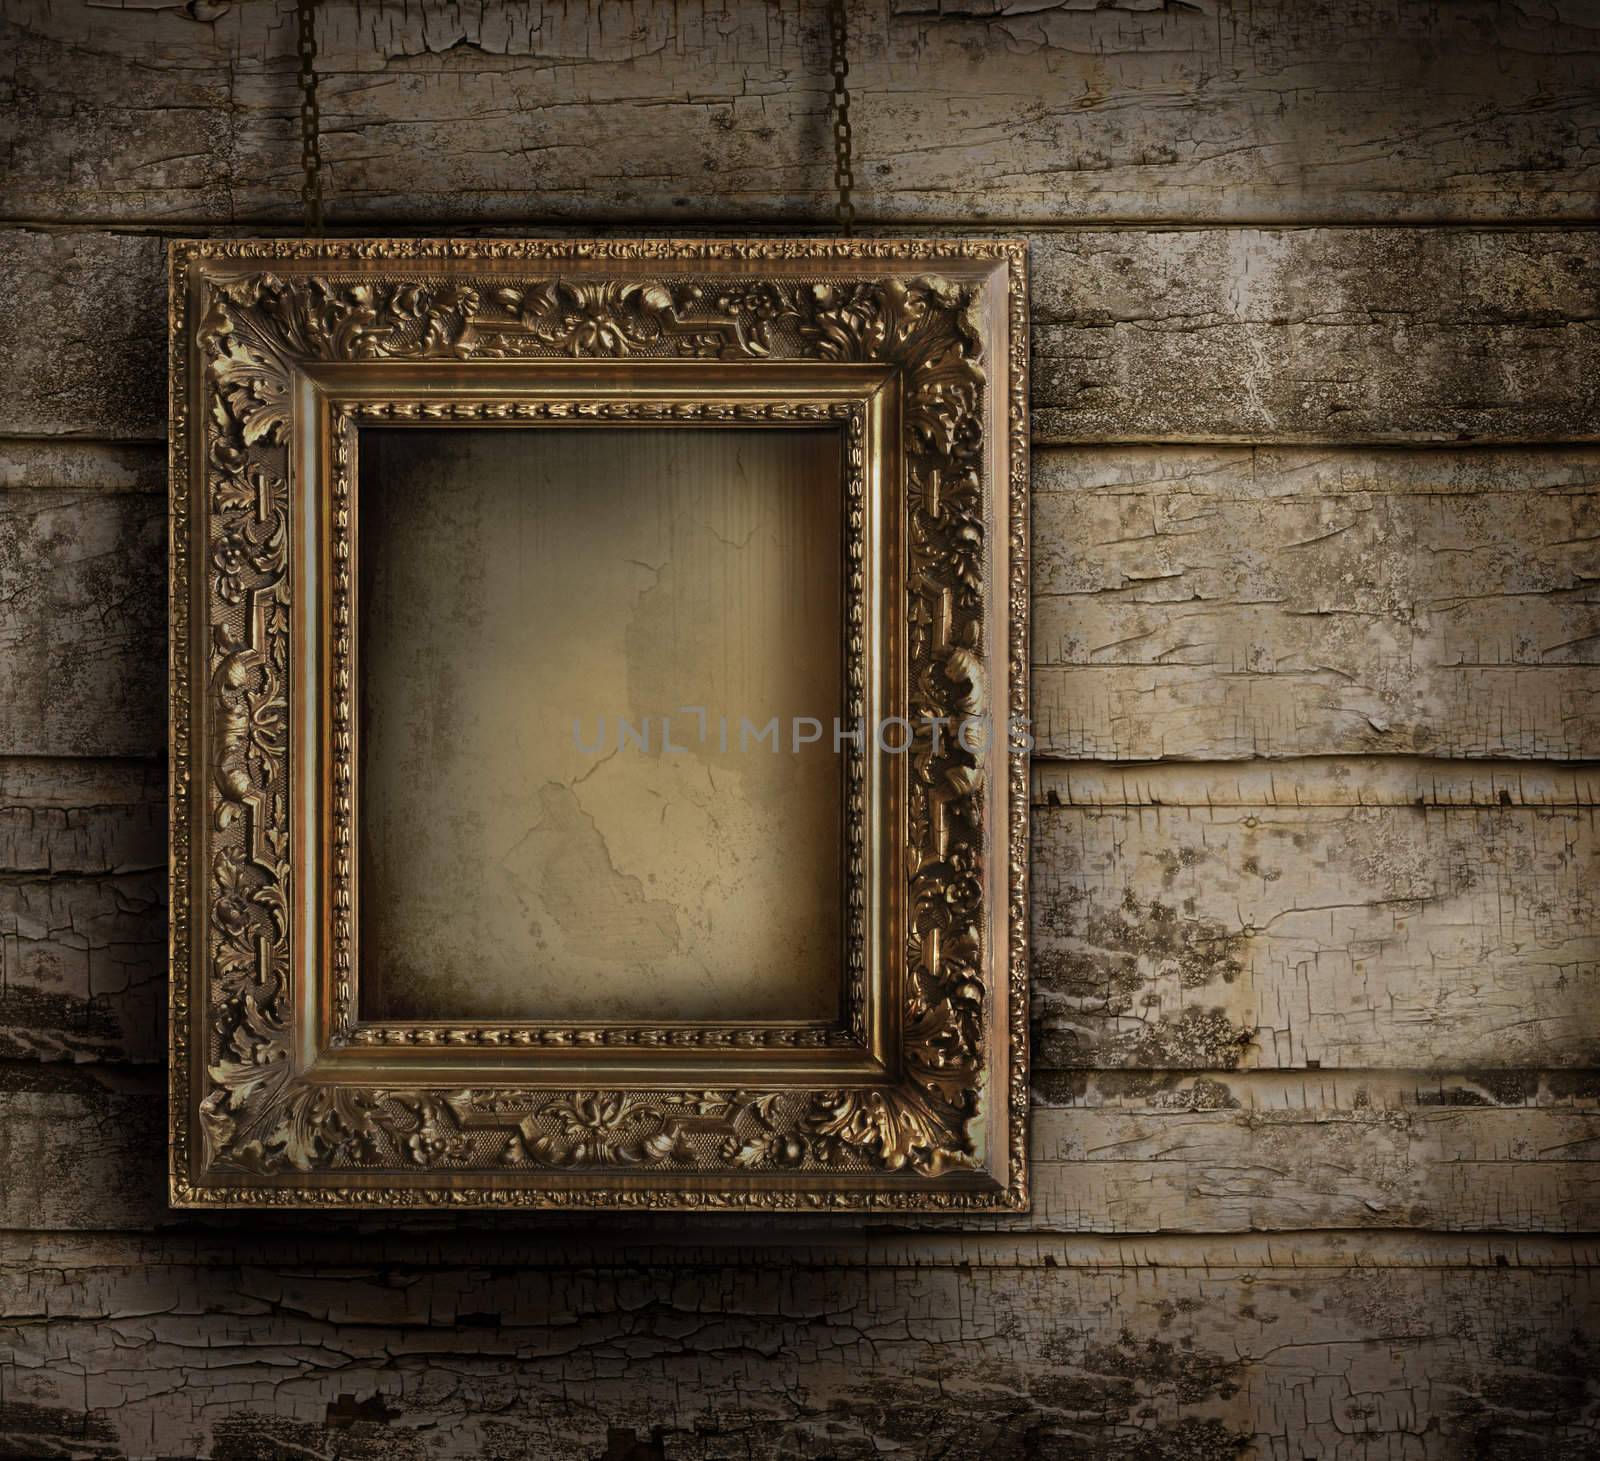 Old frame against a grungy, peeling painted wall